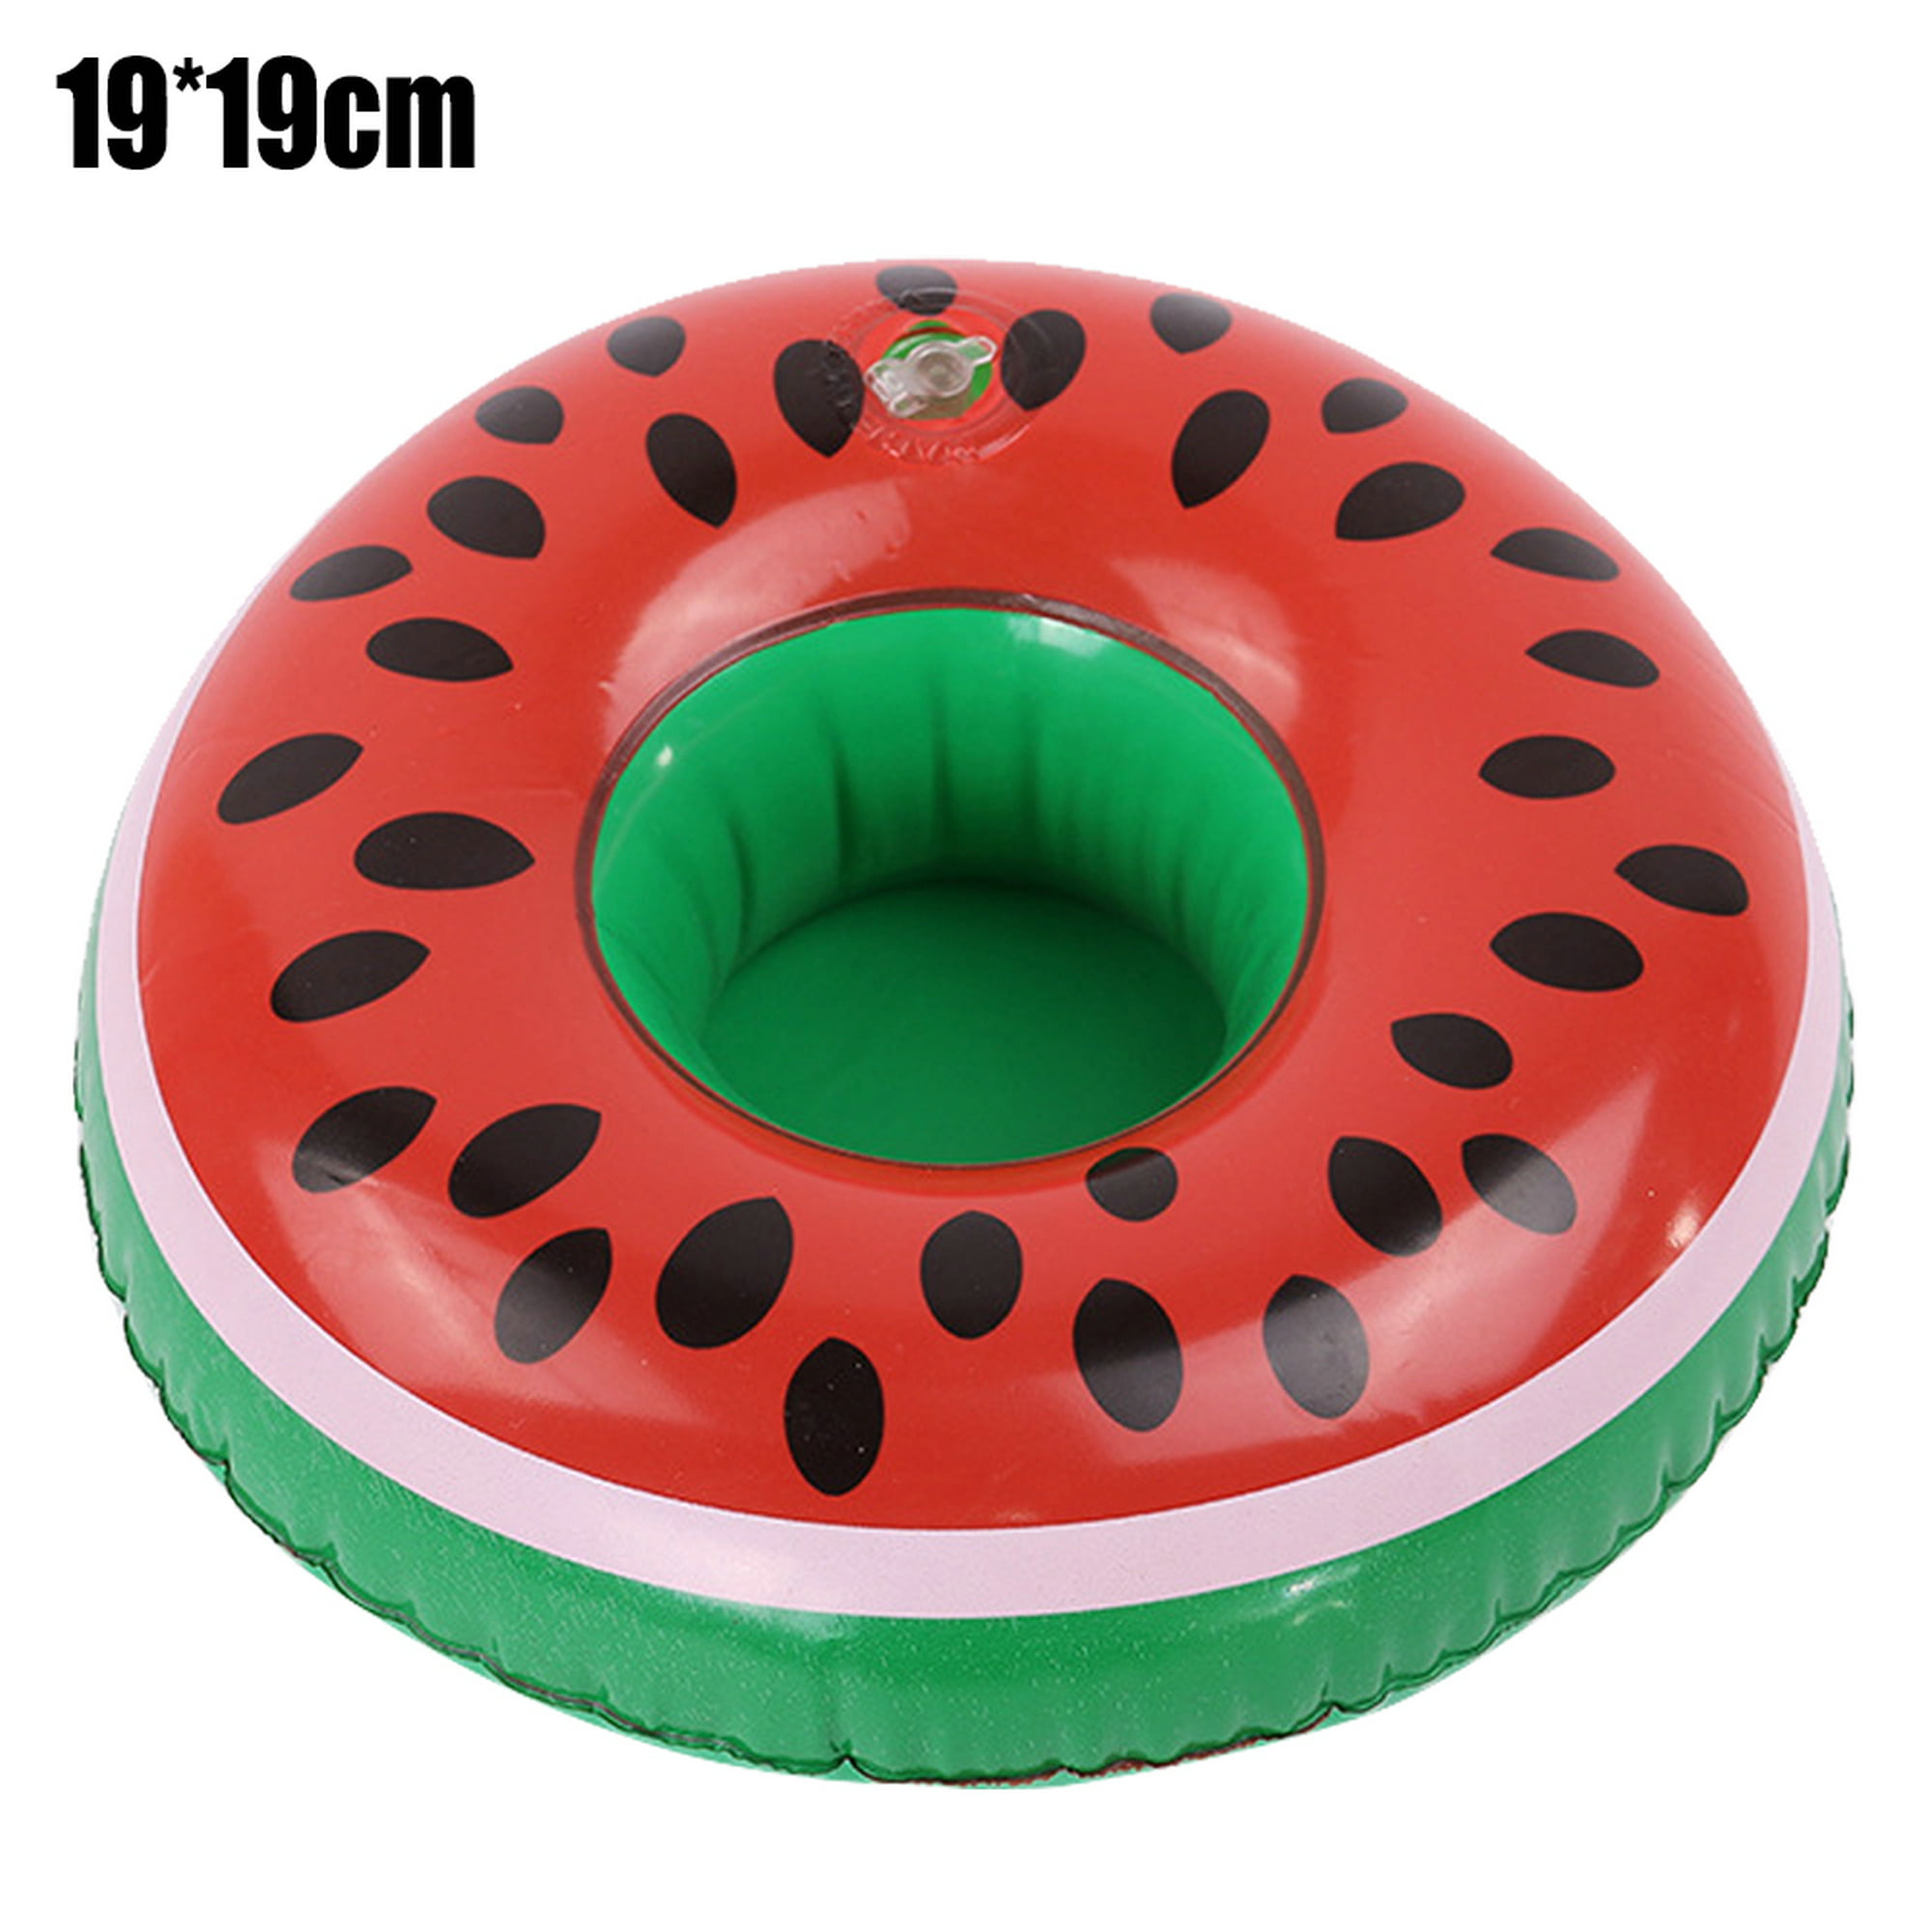 Details about   Inflatable Cup Nice Holder Drinks Floating Beach Pool Party Can Swimming MkMxH 